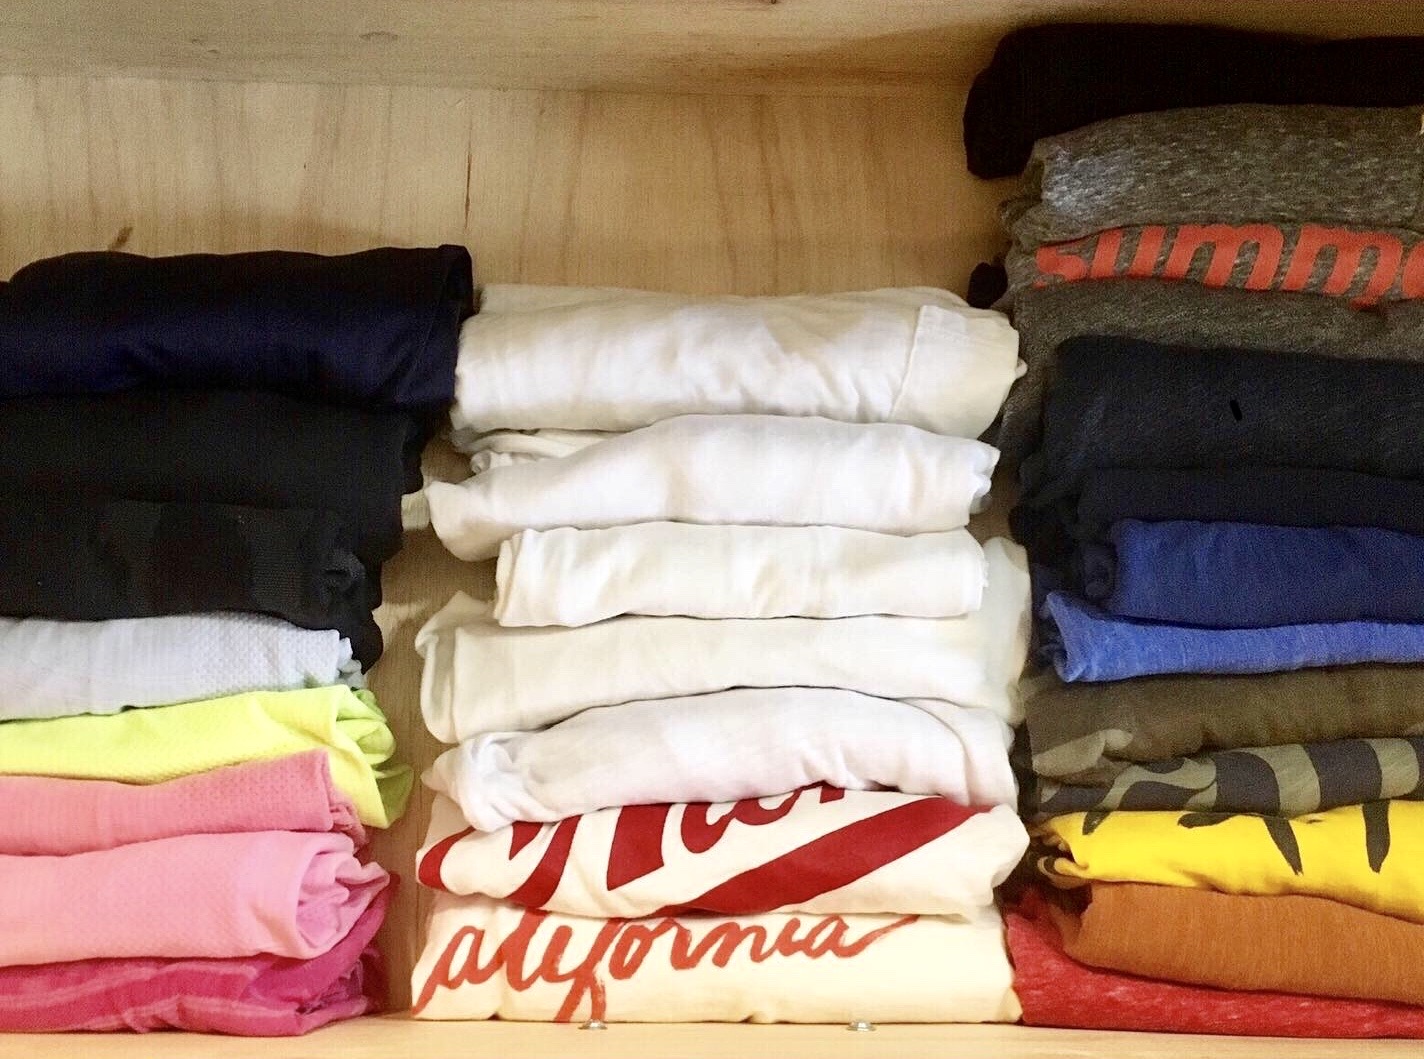 How to Organize Your Clothes - Answer From a Pro